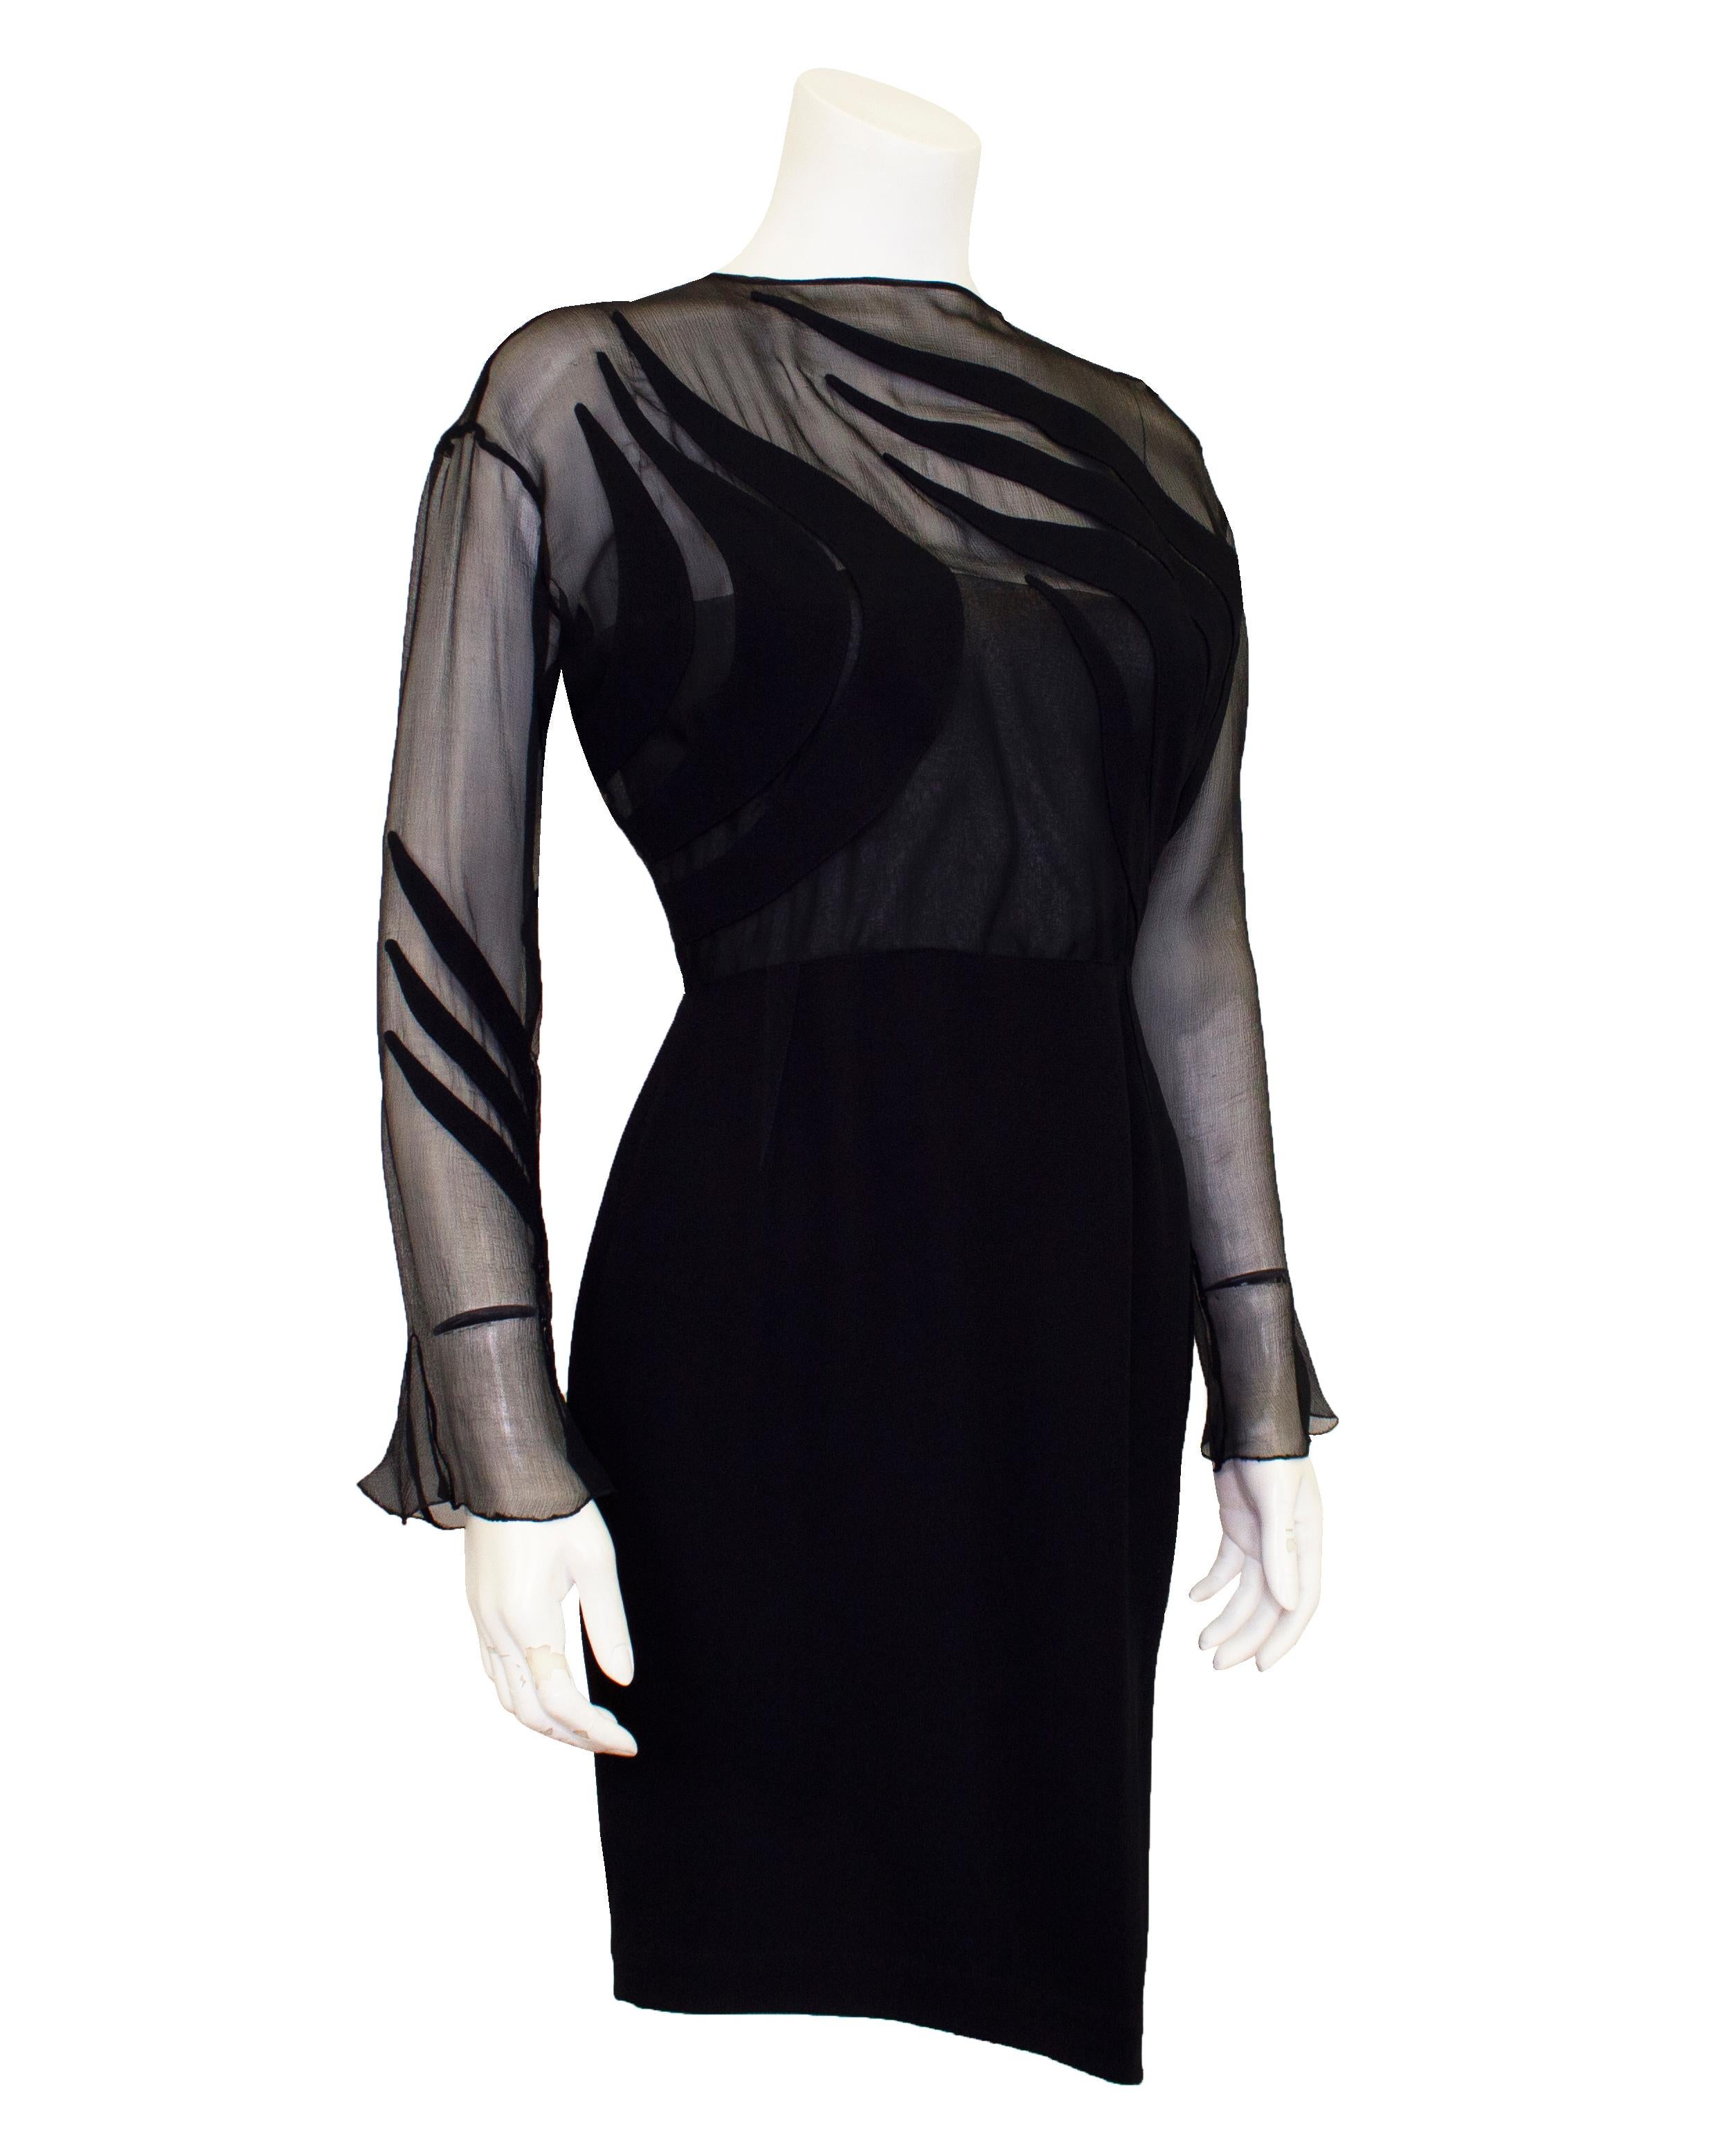 This LBD is the epitome of 1990s Thierry Mugler - ultra fabulous and sexy. The bodice and sleeves are constructed from a sheer black chiffon with black crepe panels throughout that curve and manipulate around the body to keep the bust covered. There